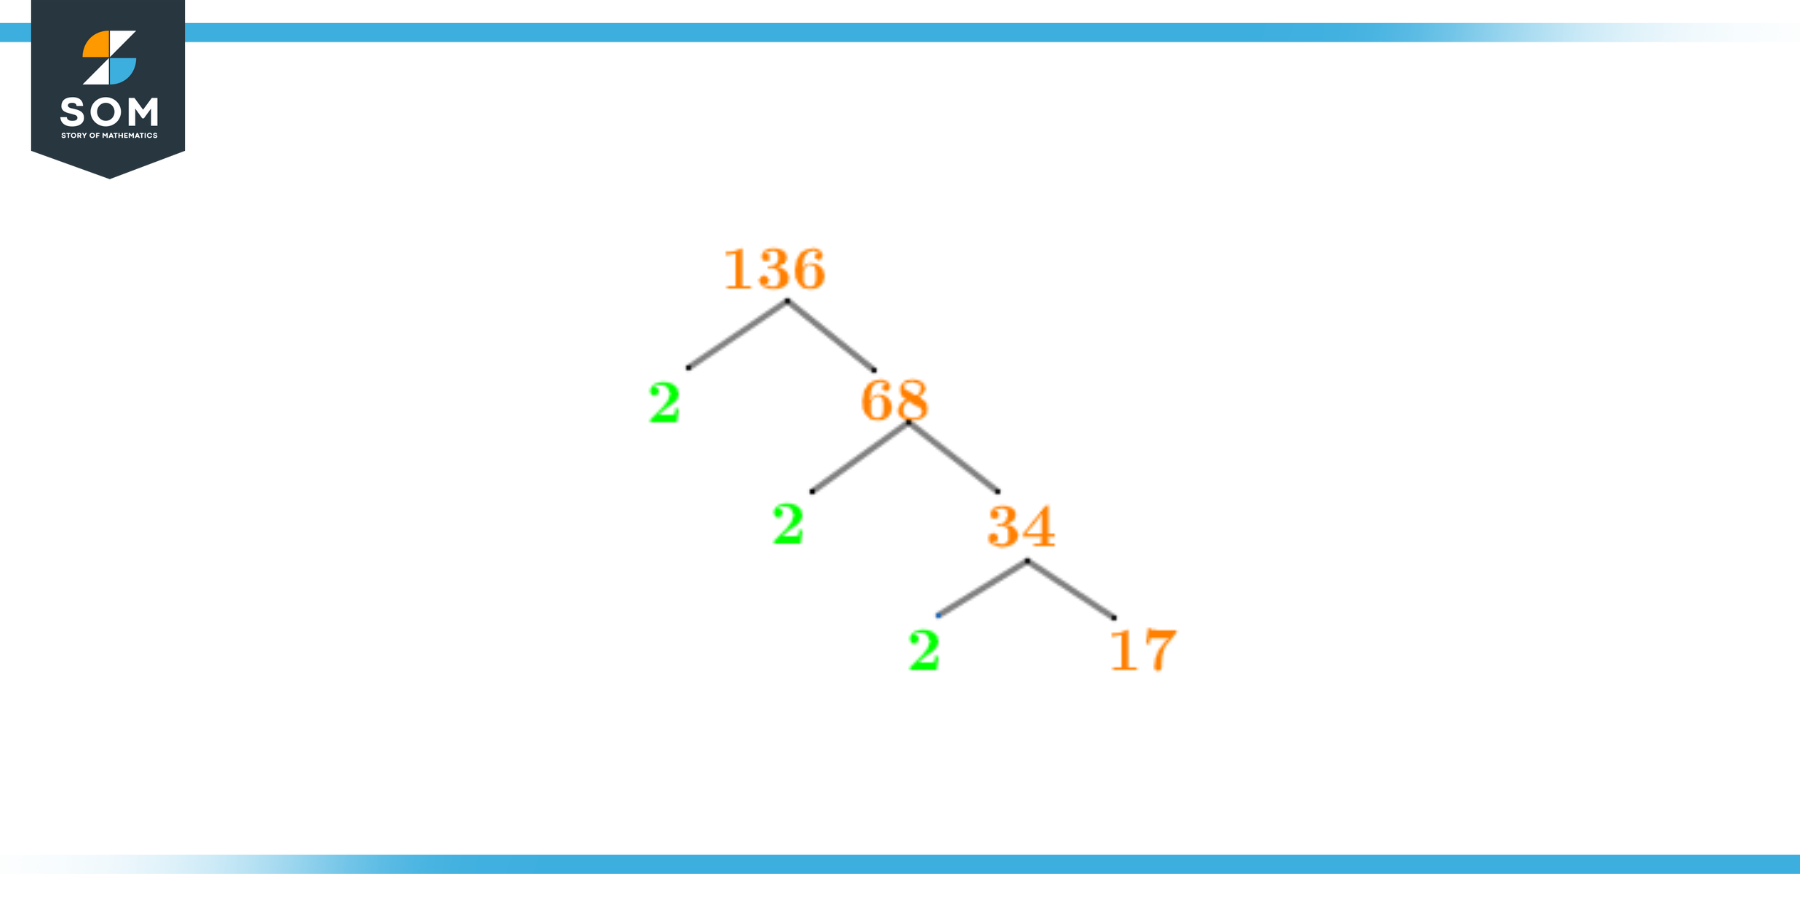 Factor tree of one thirty six